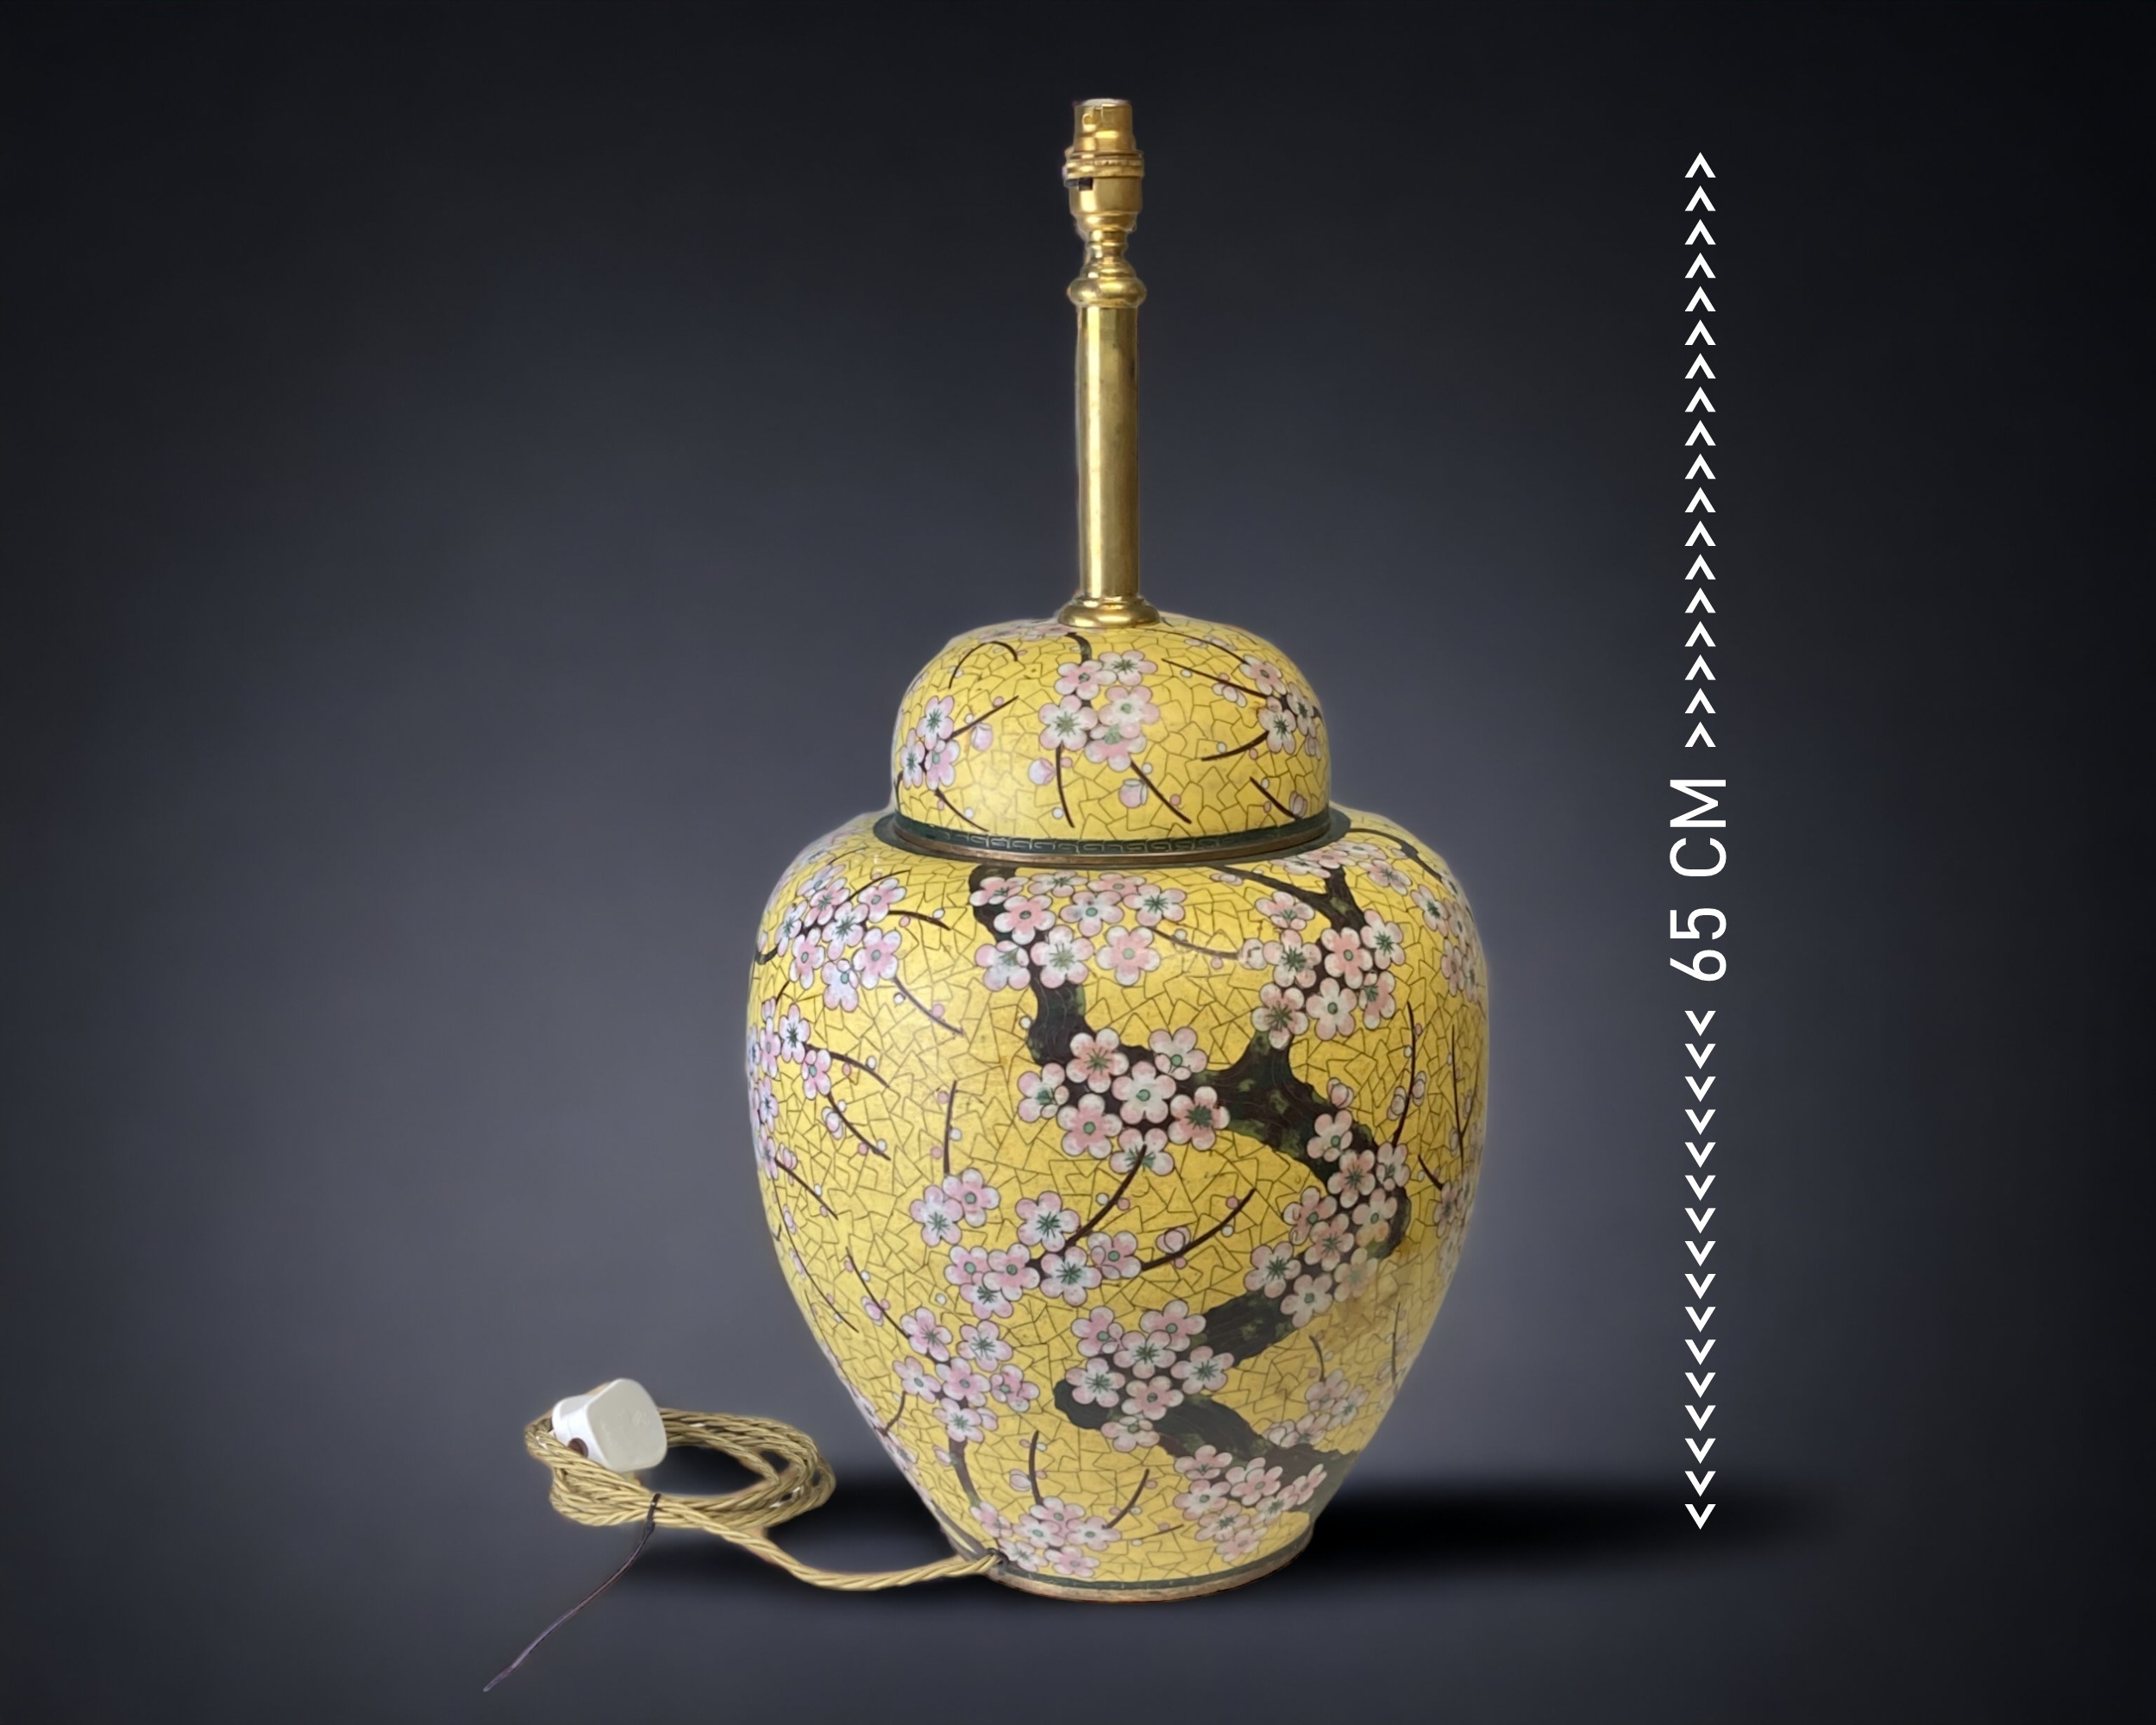 A LARGE CHINESE CLOISONNE JAR & COVER, CONVERTED TO TABLE LAMP. LATE QING DYNASTY. IMPERIAL YELLOW